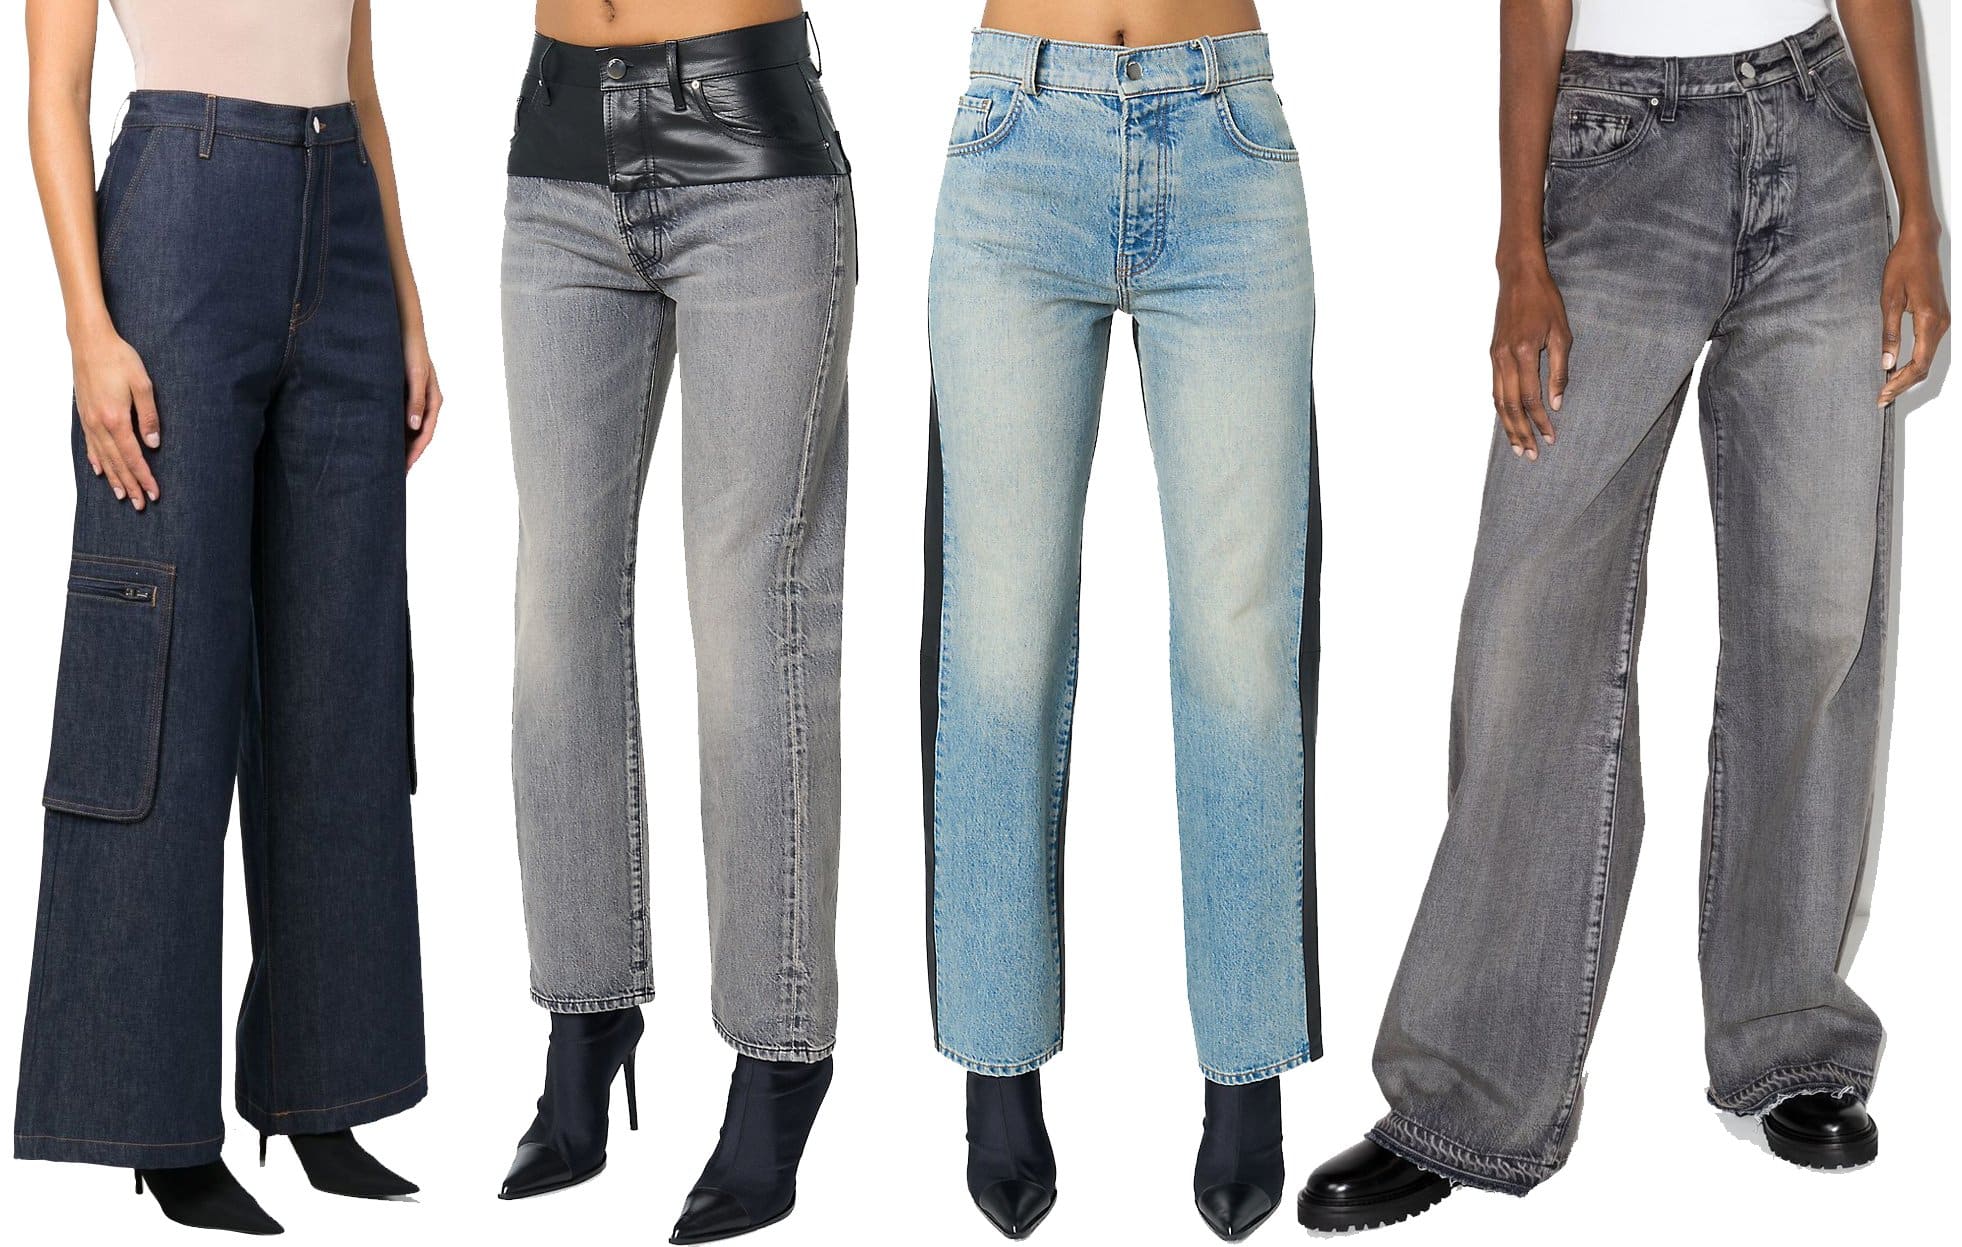 AMIRI Jeans: The Ultimate Fusion of California Cool and Rock 'n' Roll Chic